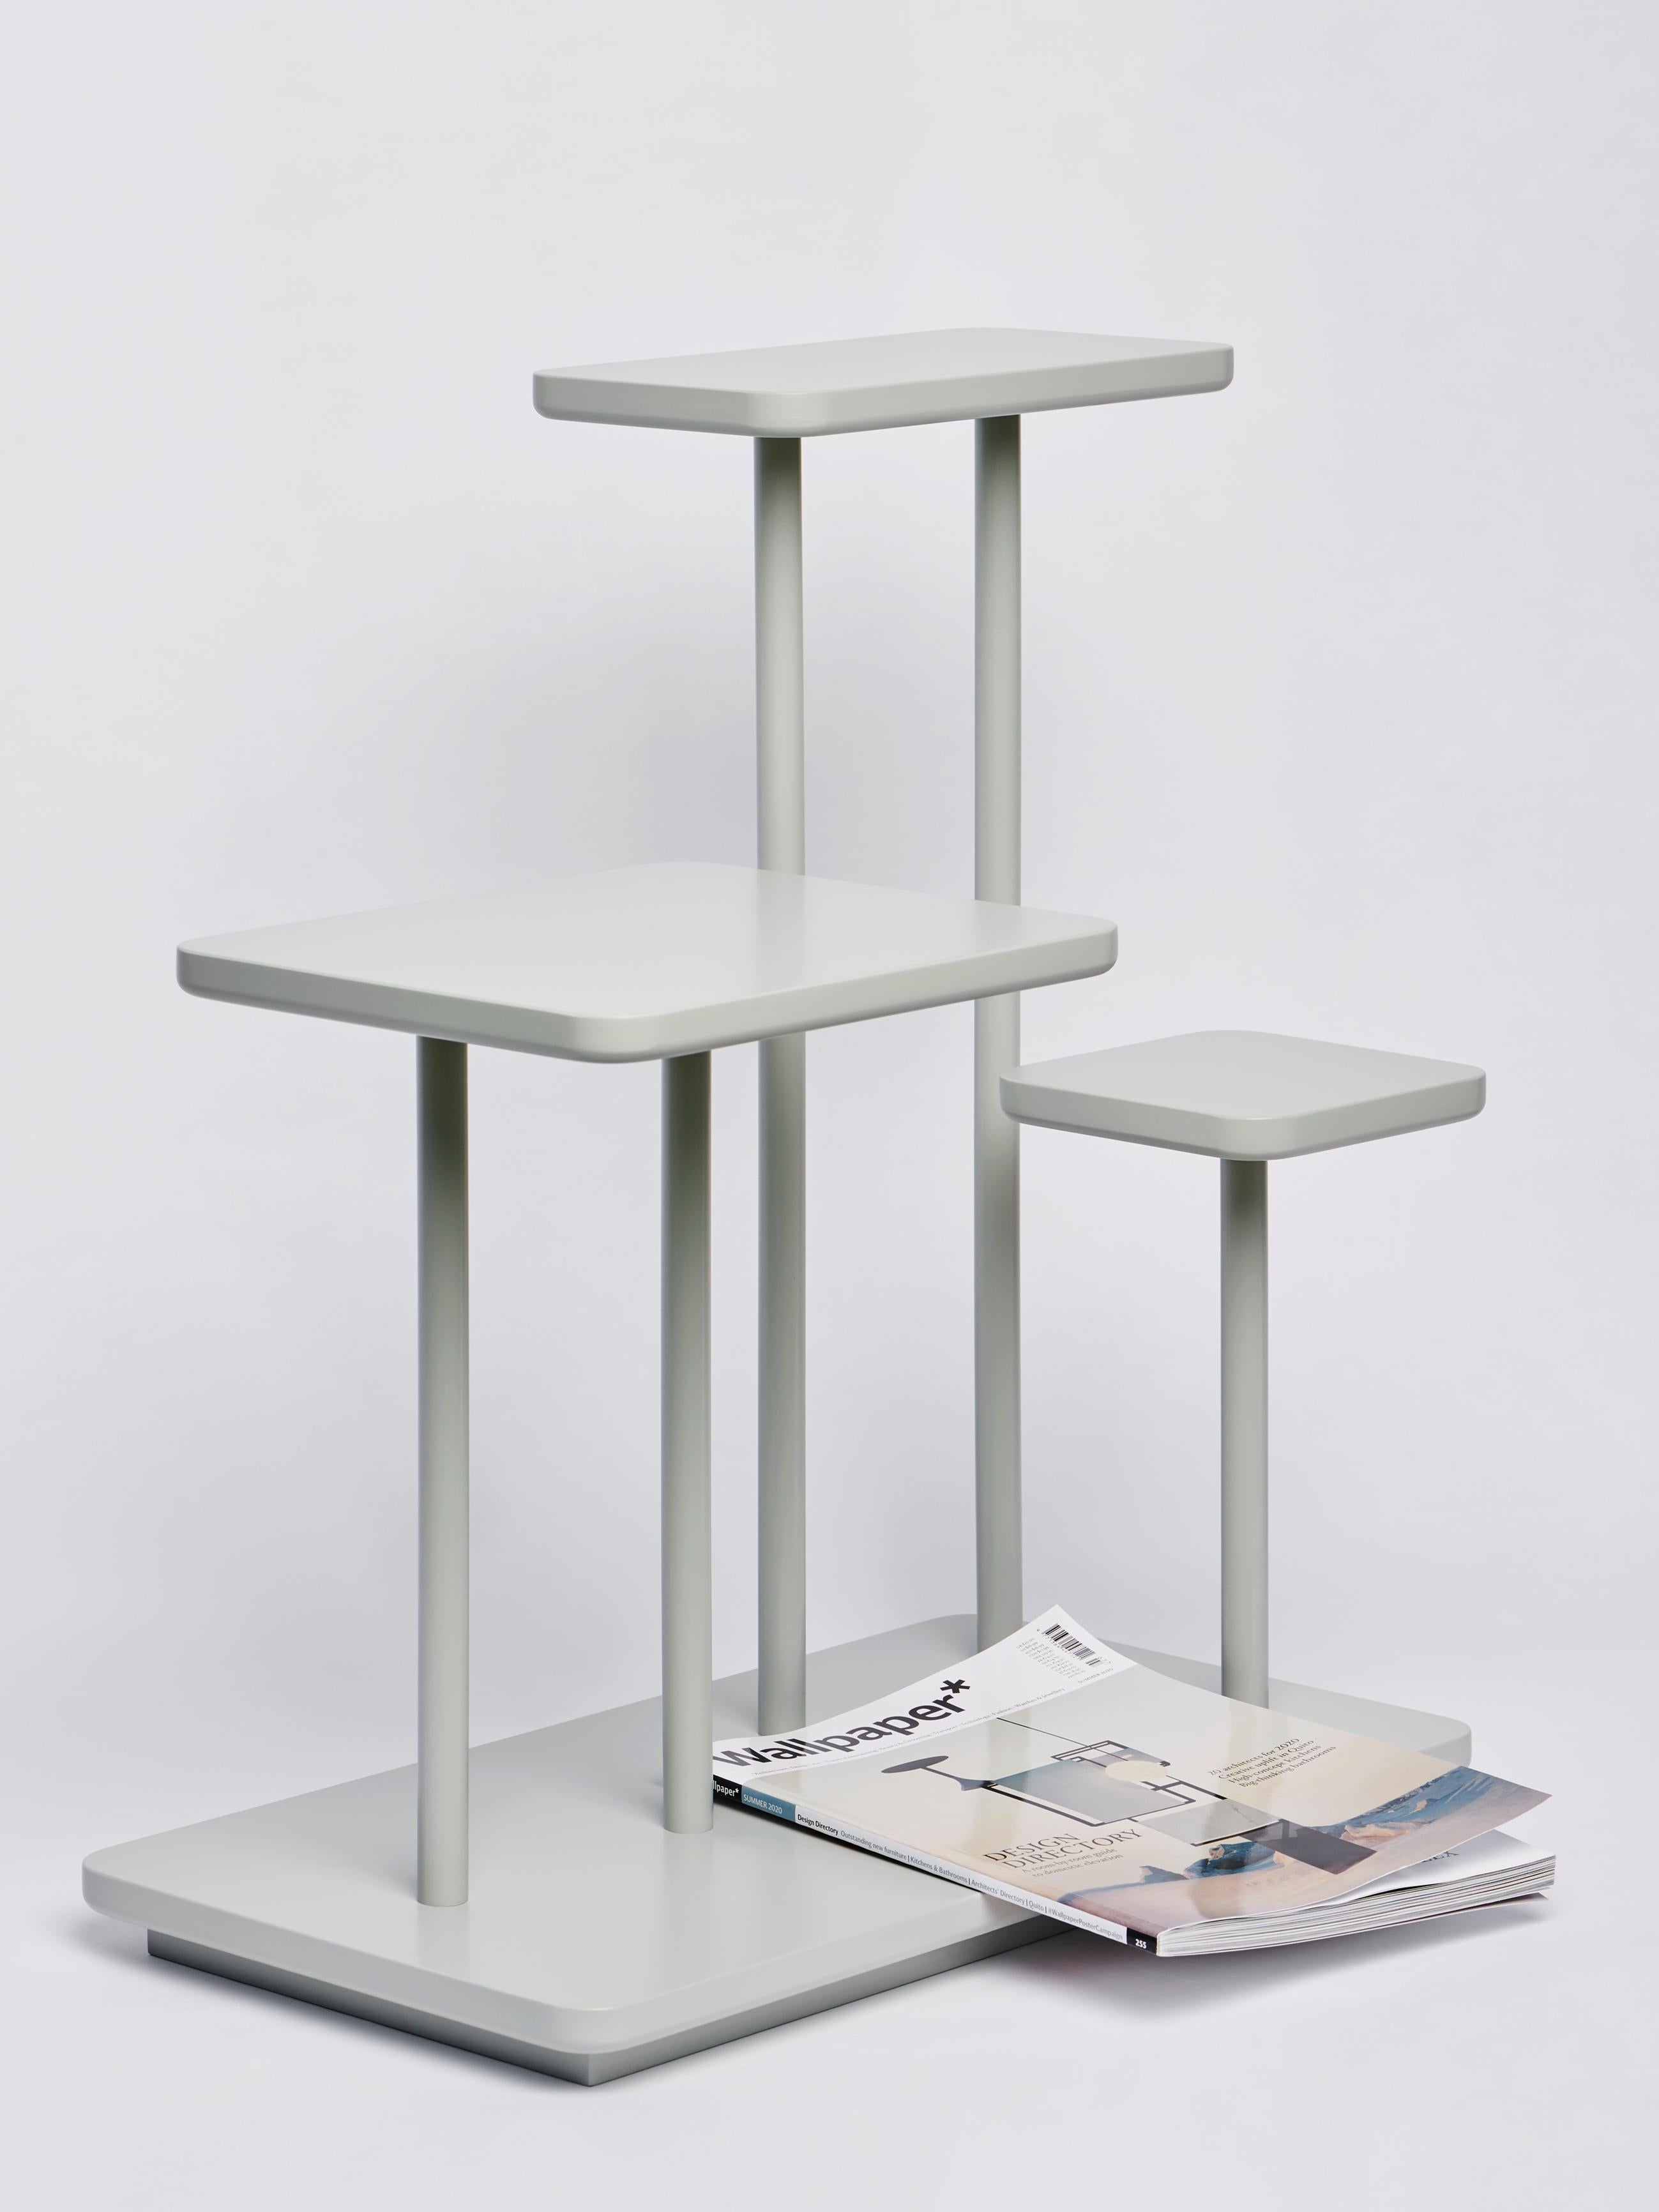 The end table “Isolette” is a part of the “Isole” family of Atelier Ferraro. It displays a similar design principle as the coffee table “Isole”, on a smaller scale, to serve either as an accent beside a couch or an armchair – or as a repository in